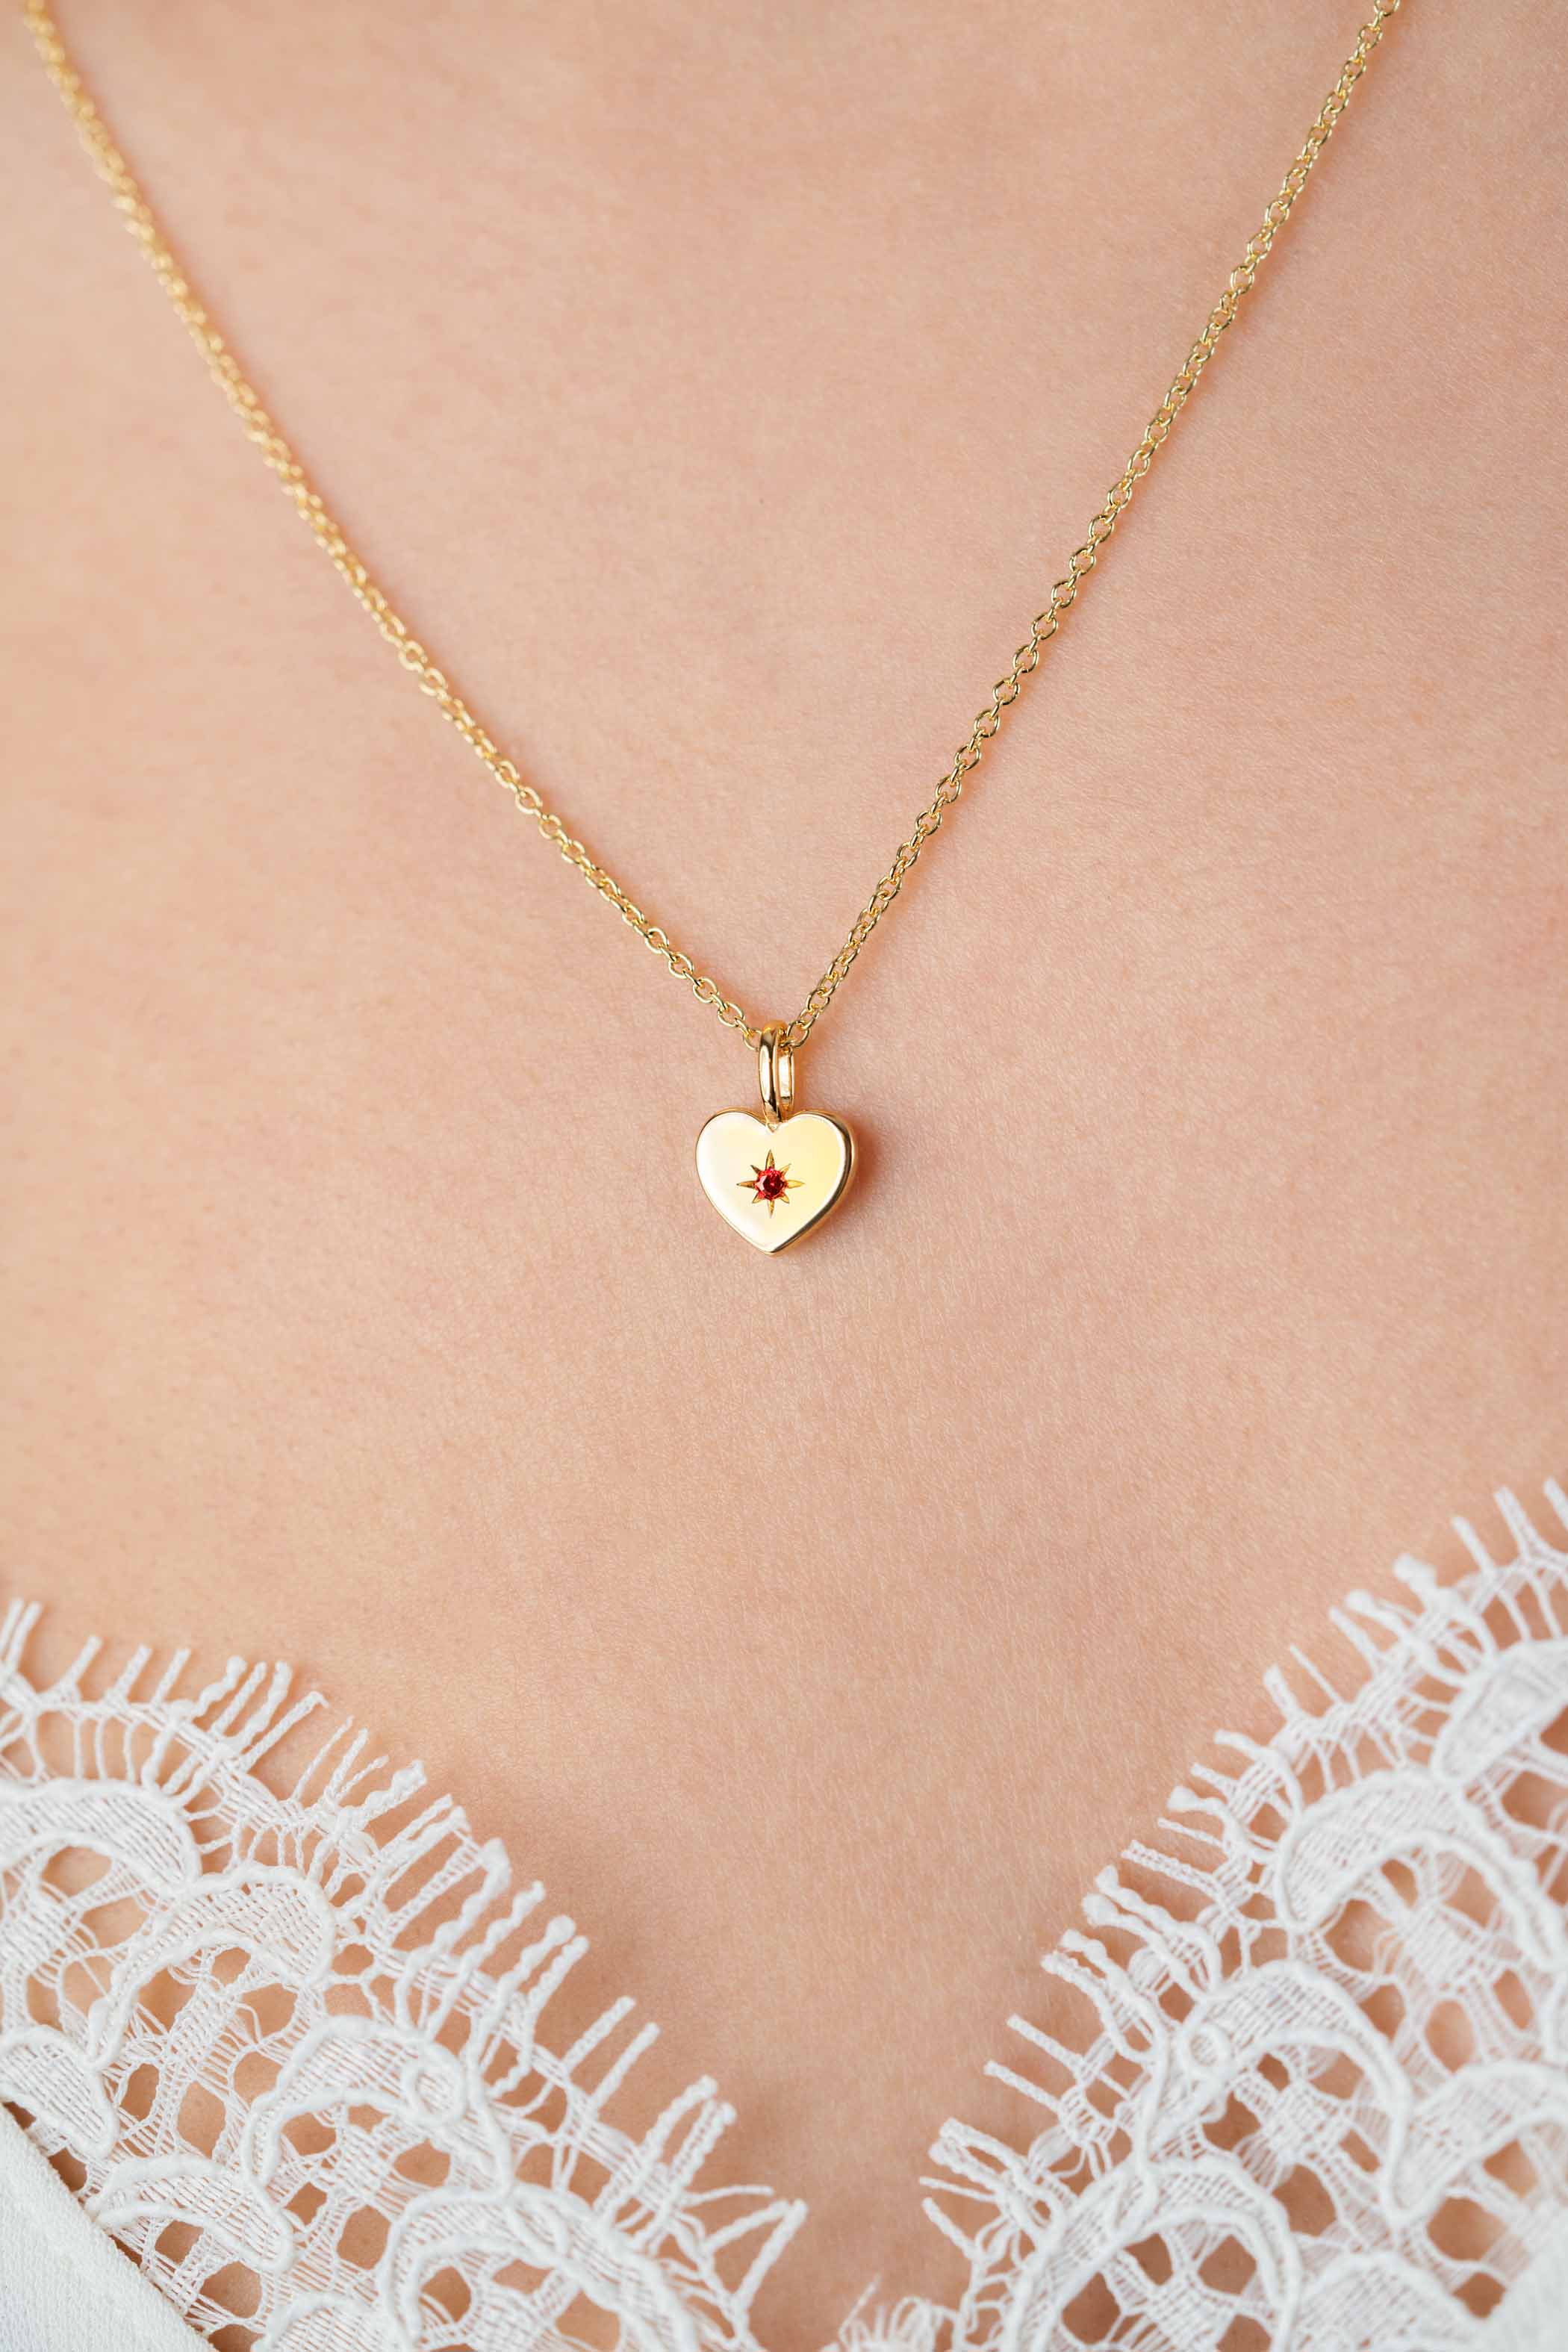 JANUARY Pendant 12mm Gold Plated Heart Birthstone Red Garnet Zirconia (excl. necklace)